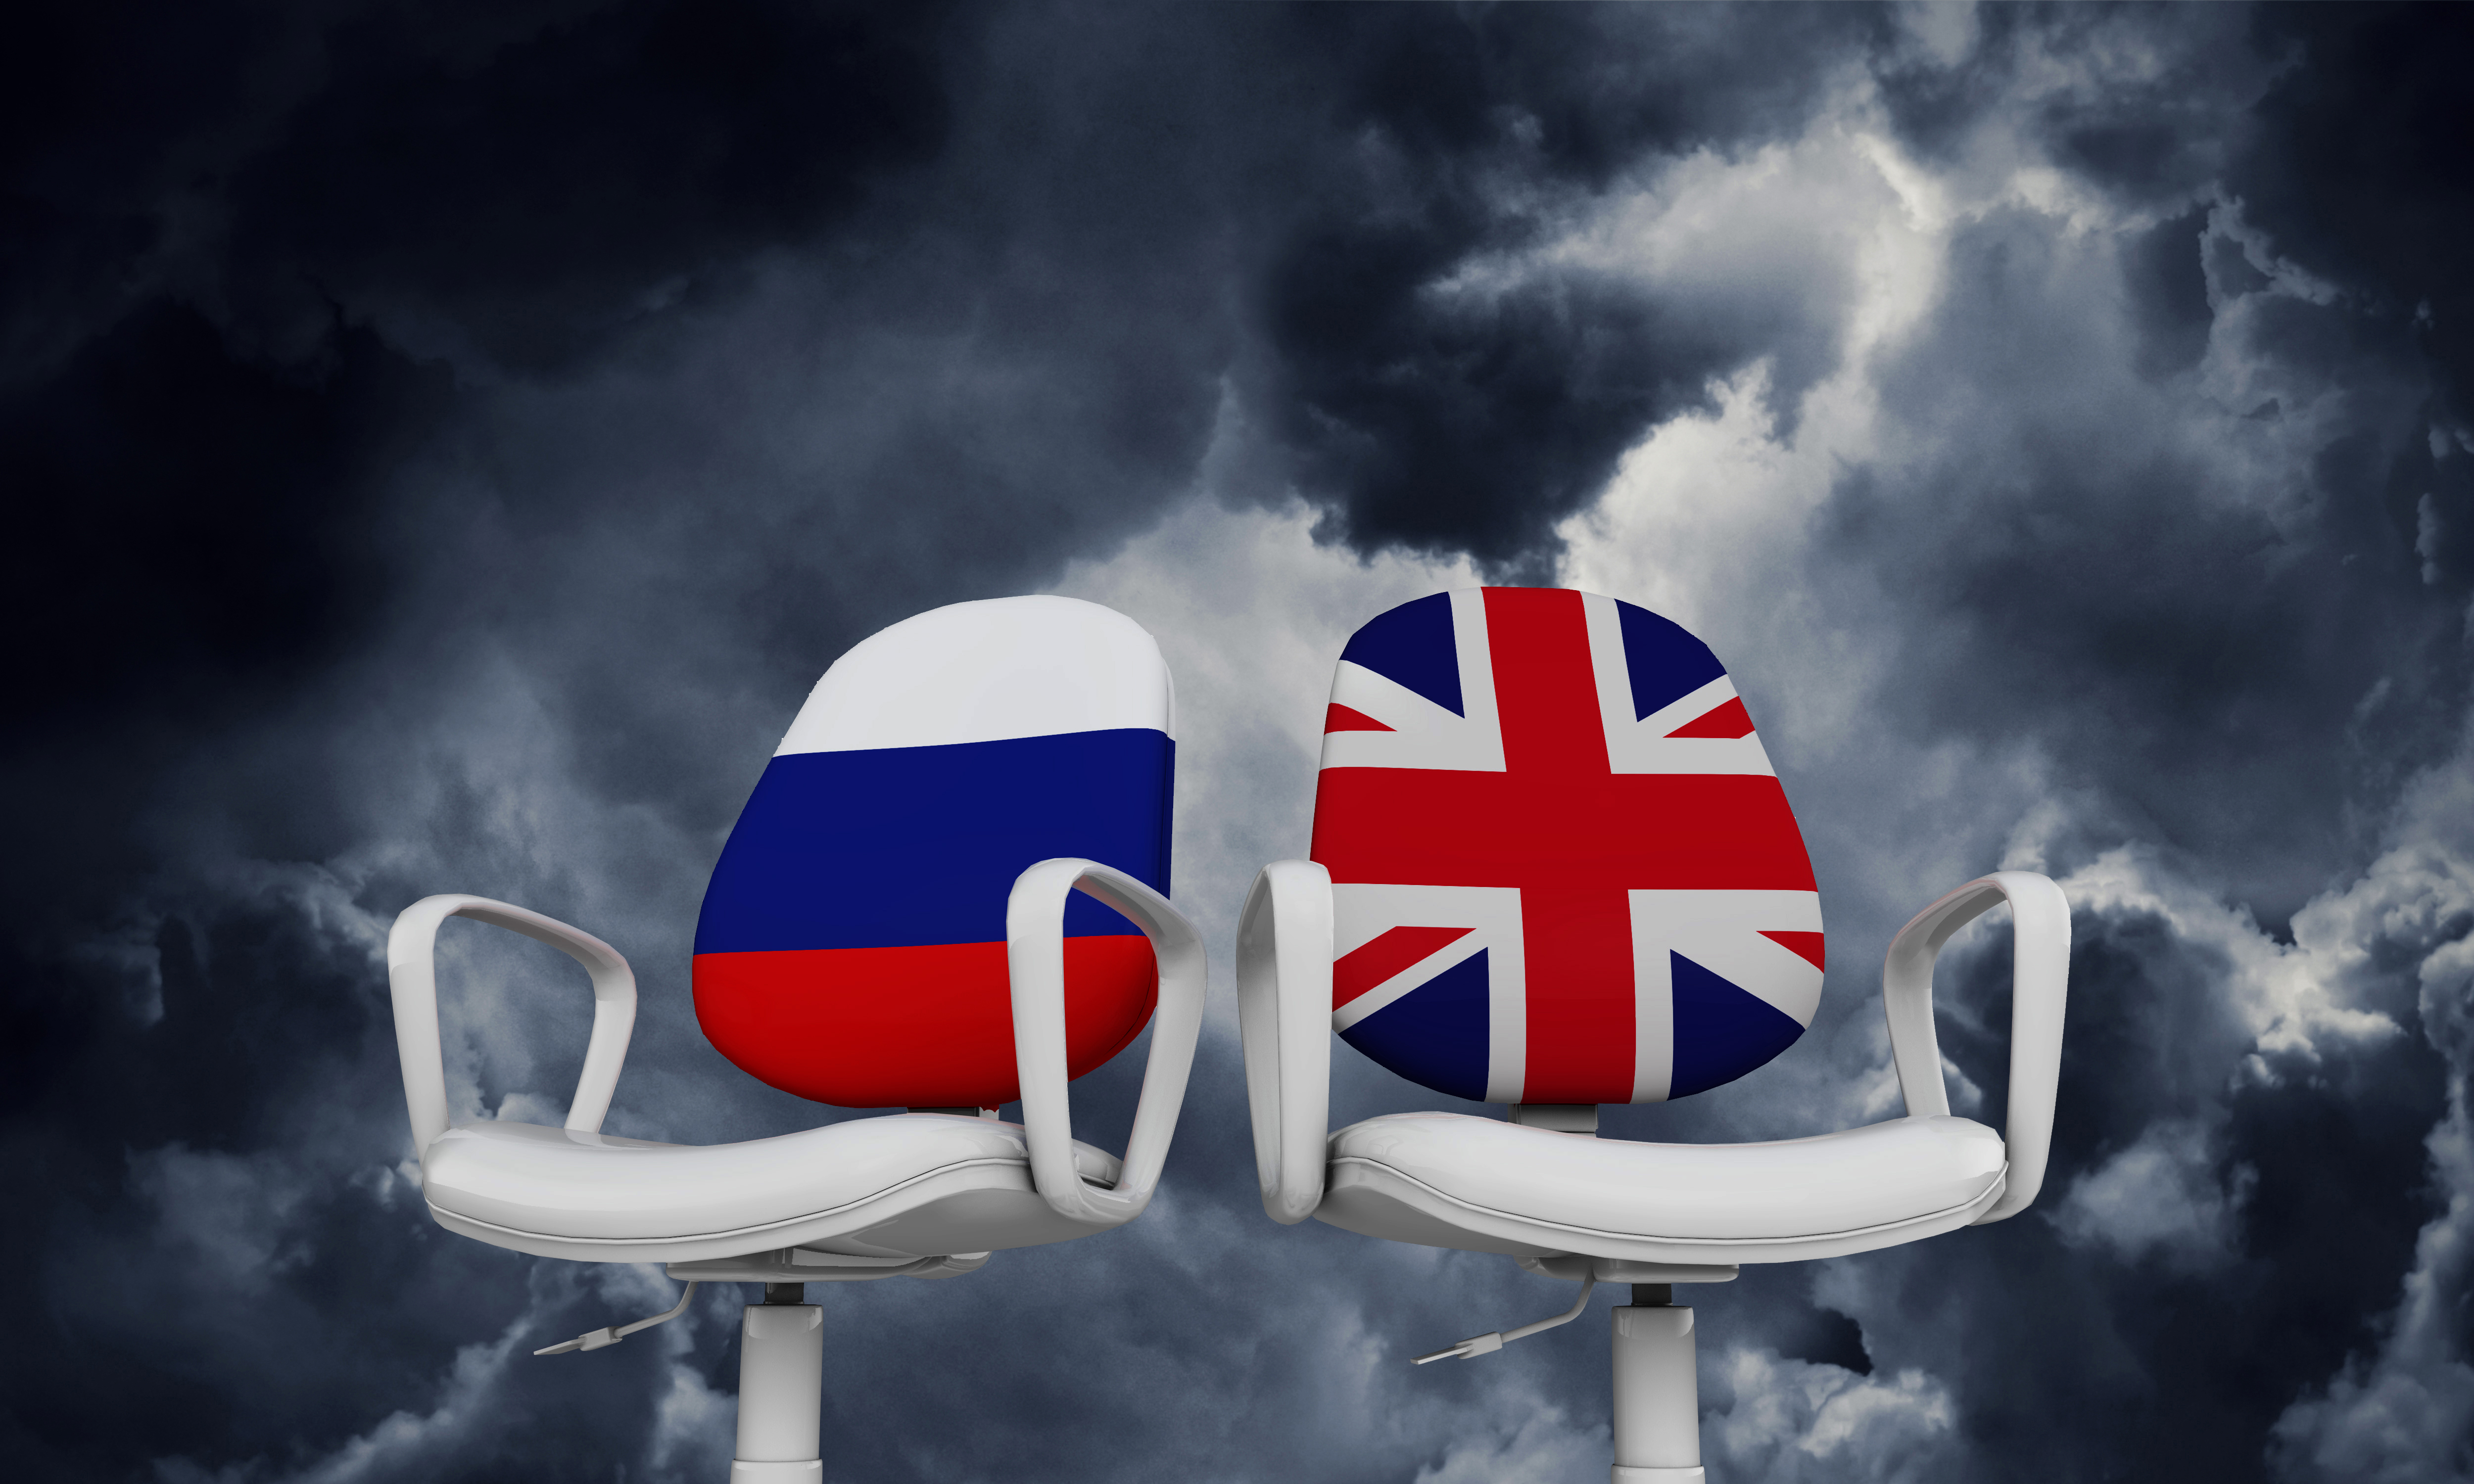 chairs infront of sky with France and United Kindom flags on